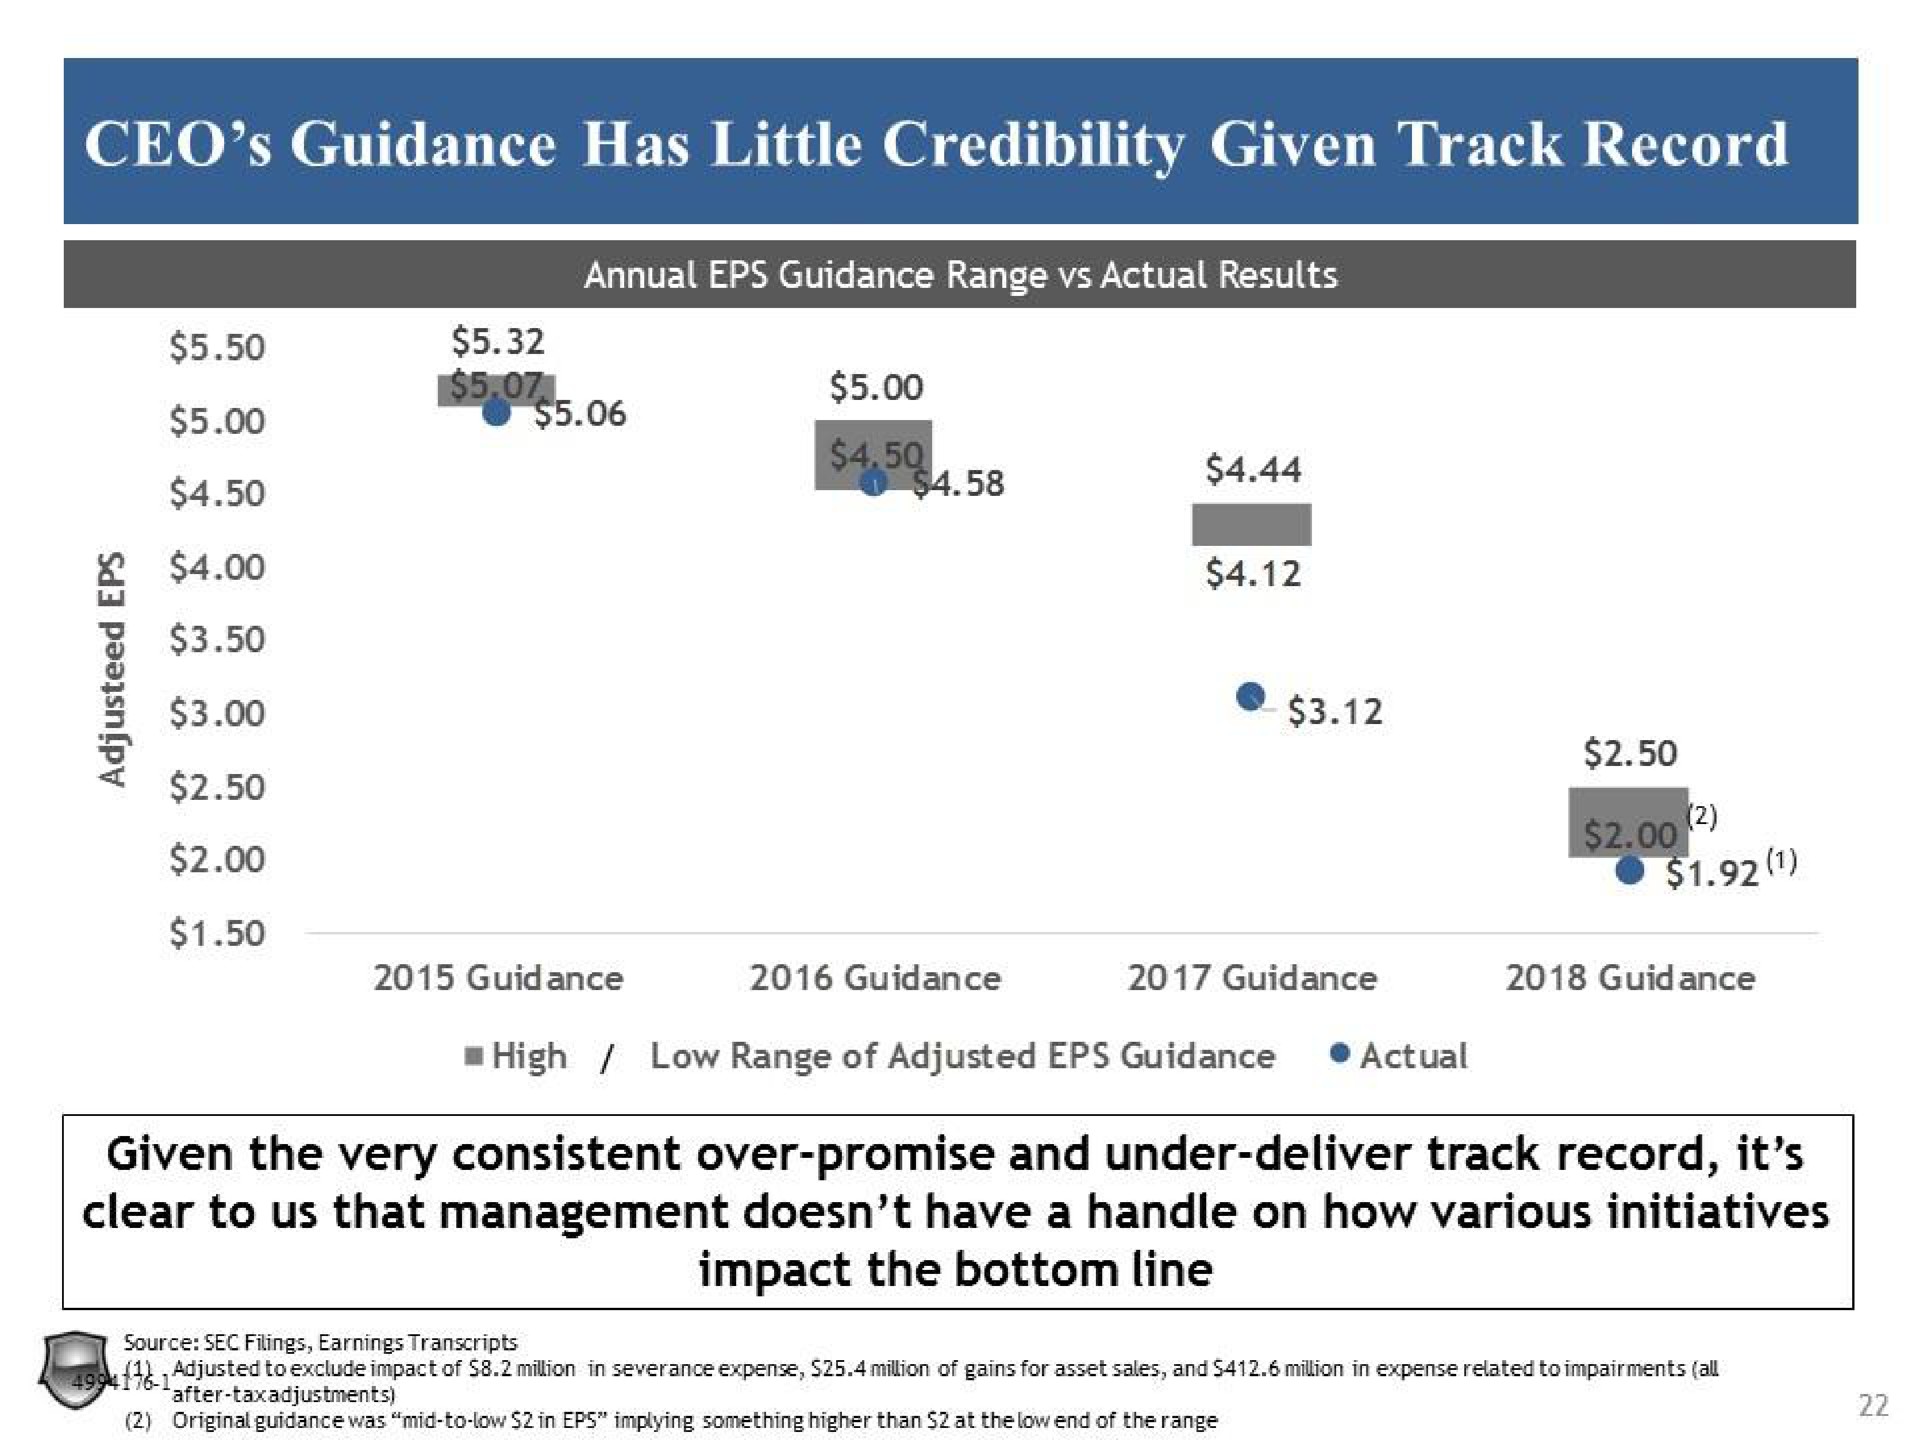 guidance has little credibility given track record me sam i given the very consistent over promise and under deliver track record it clear to us that management have a handle on how various initiatives impact the bottom line | Legion Partners